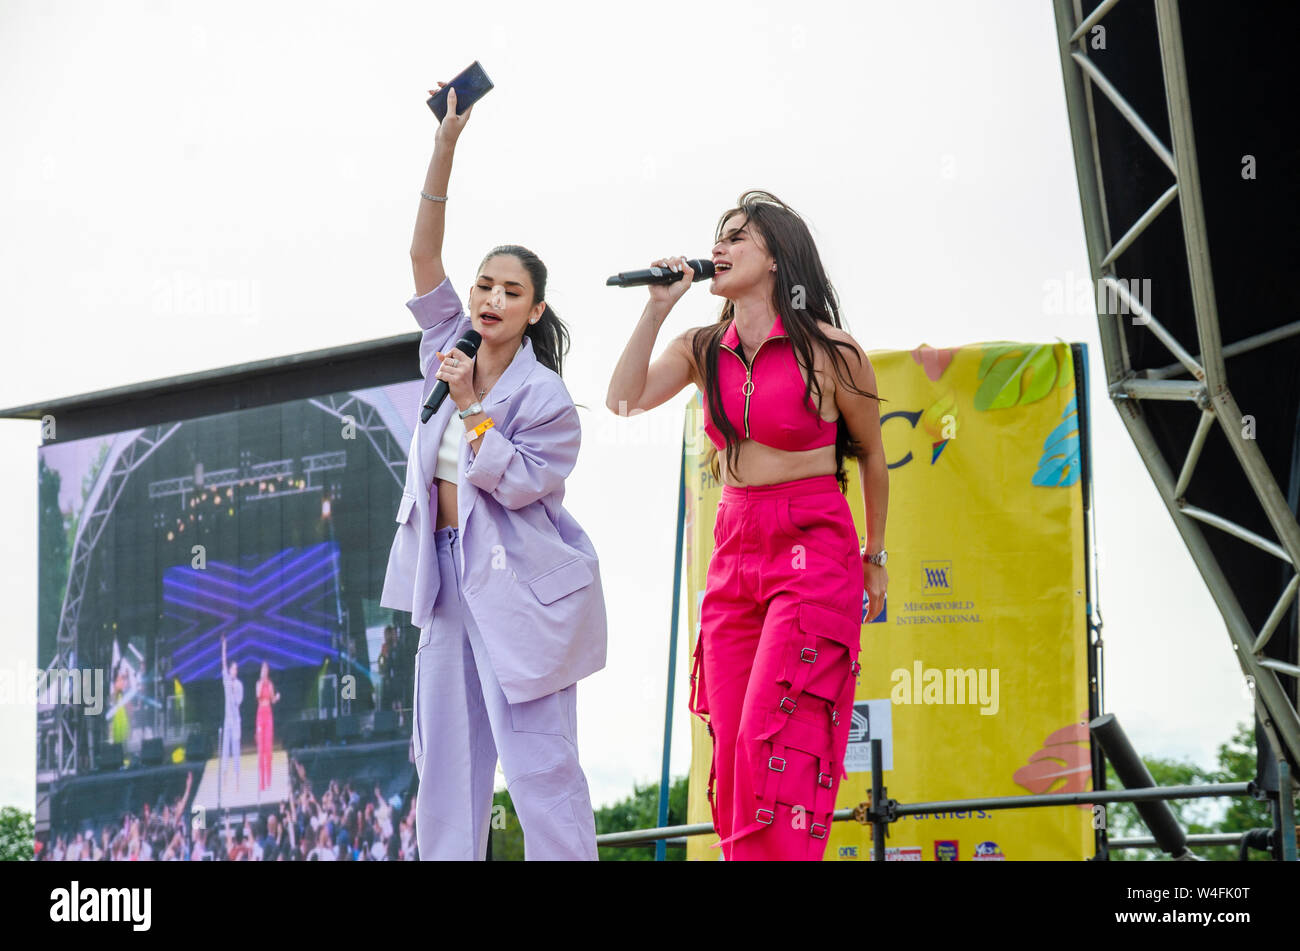 Filipino artists Pia Wurtzback and Anne Curtis perform on stage at a Filipino cultural event in London, UK Stock Photo